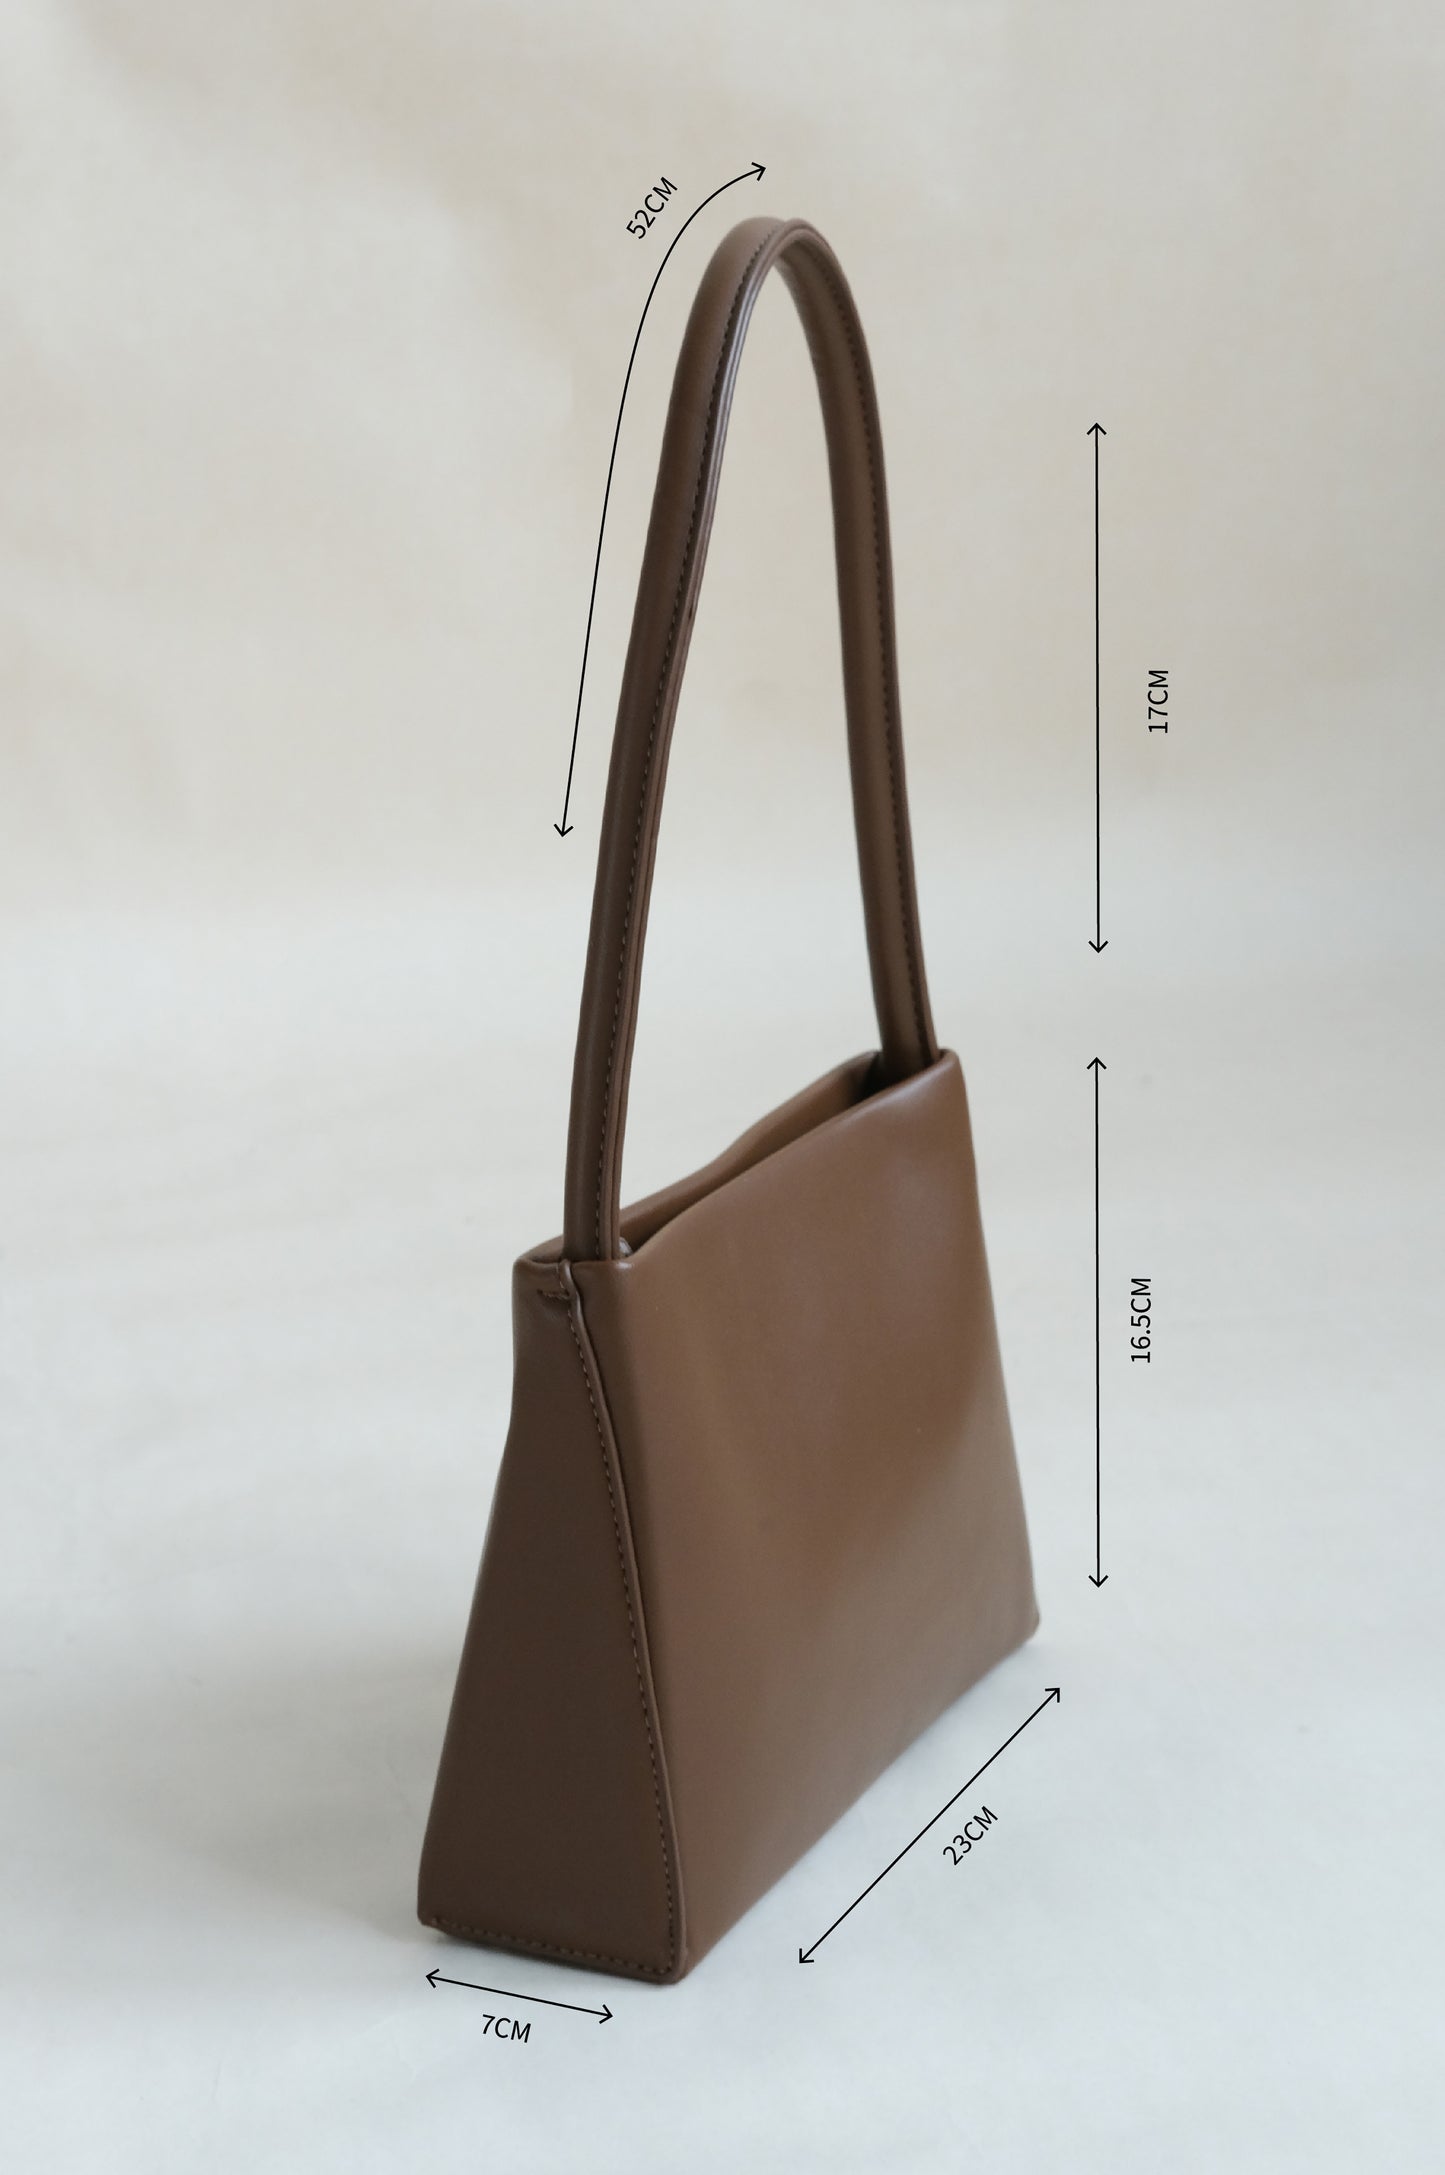 Square tote bag with one shoulder under the armpits in coffee